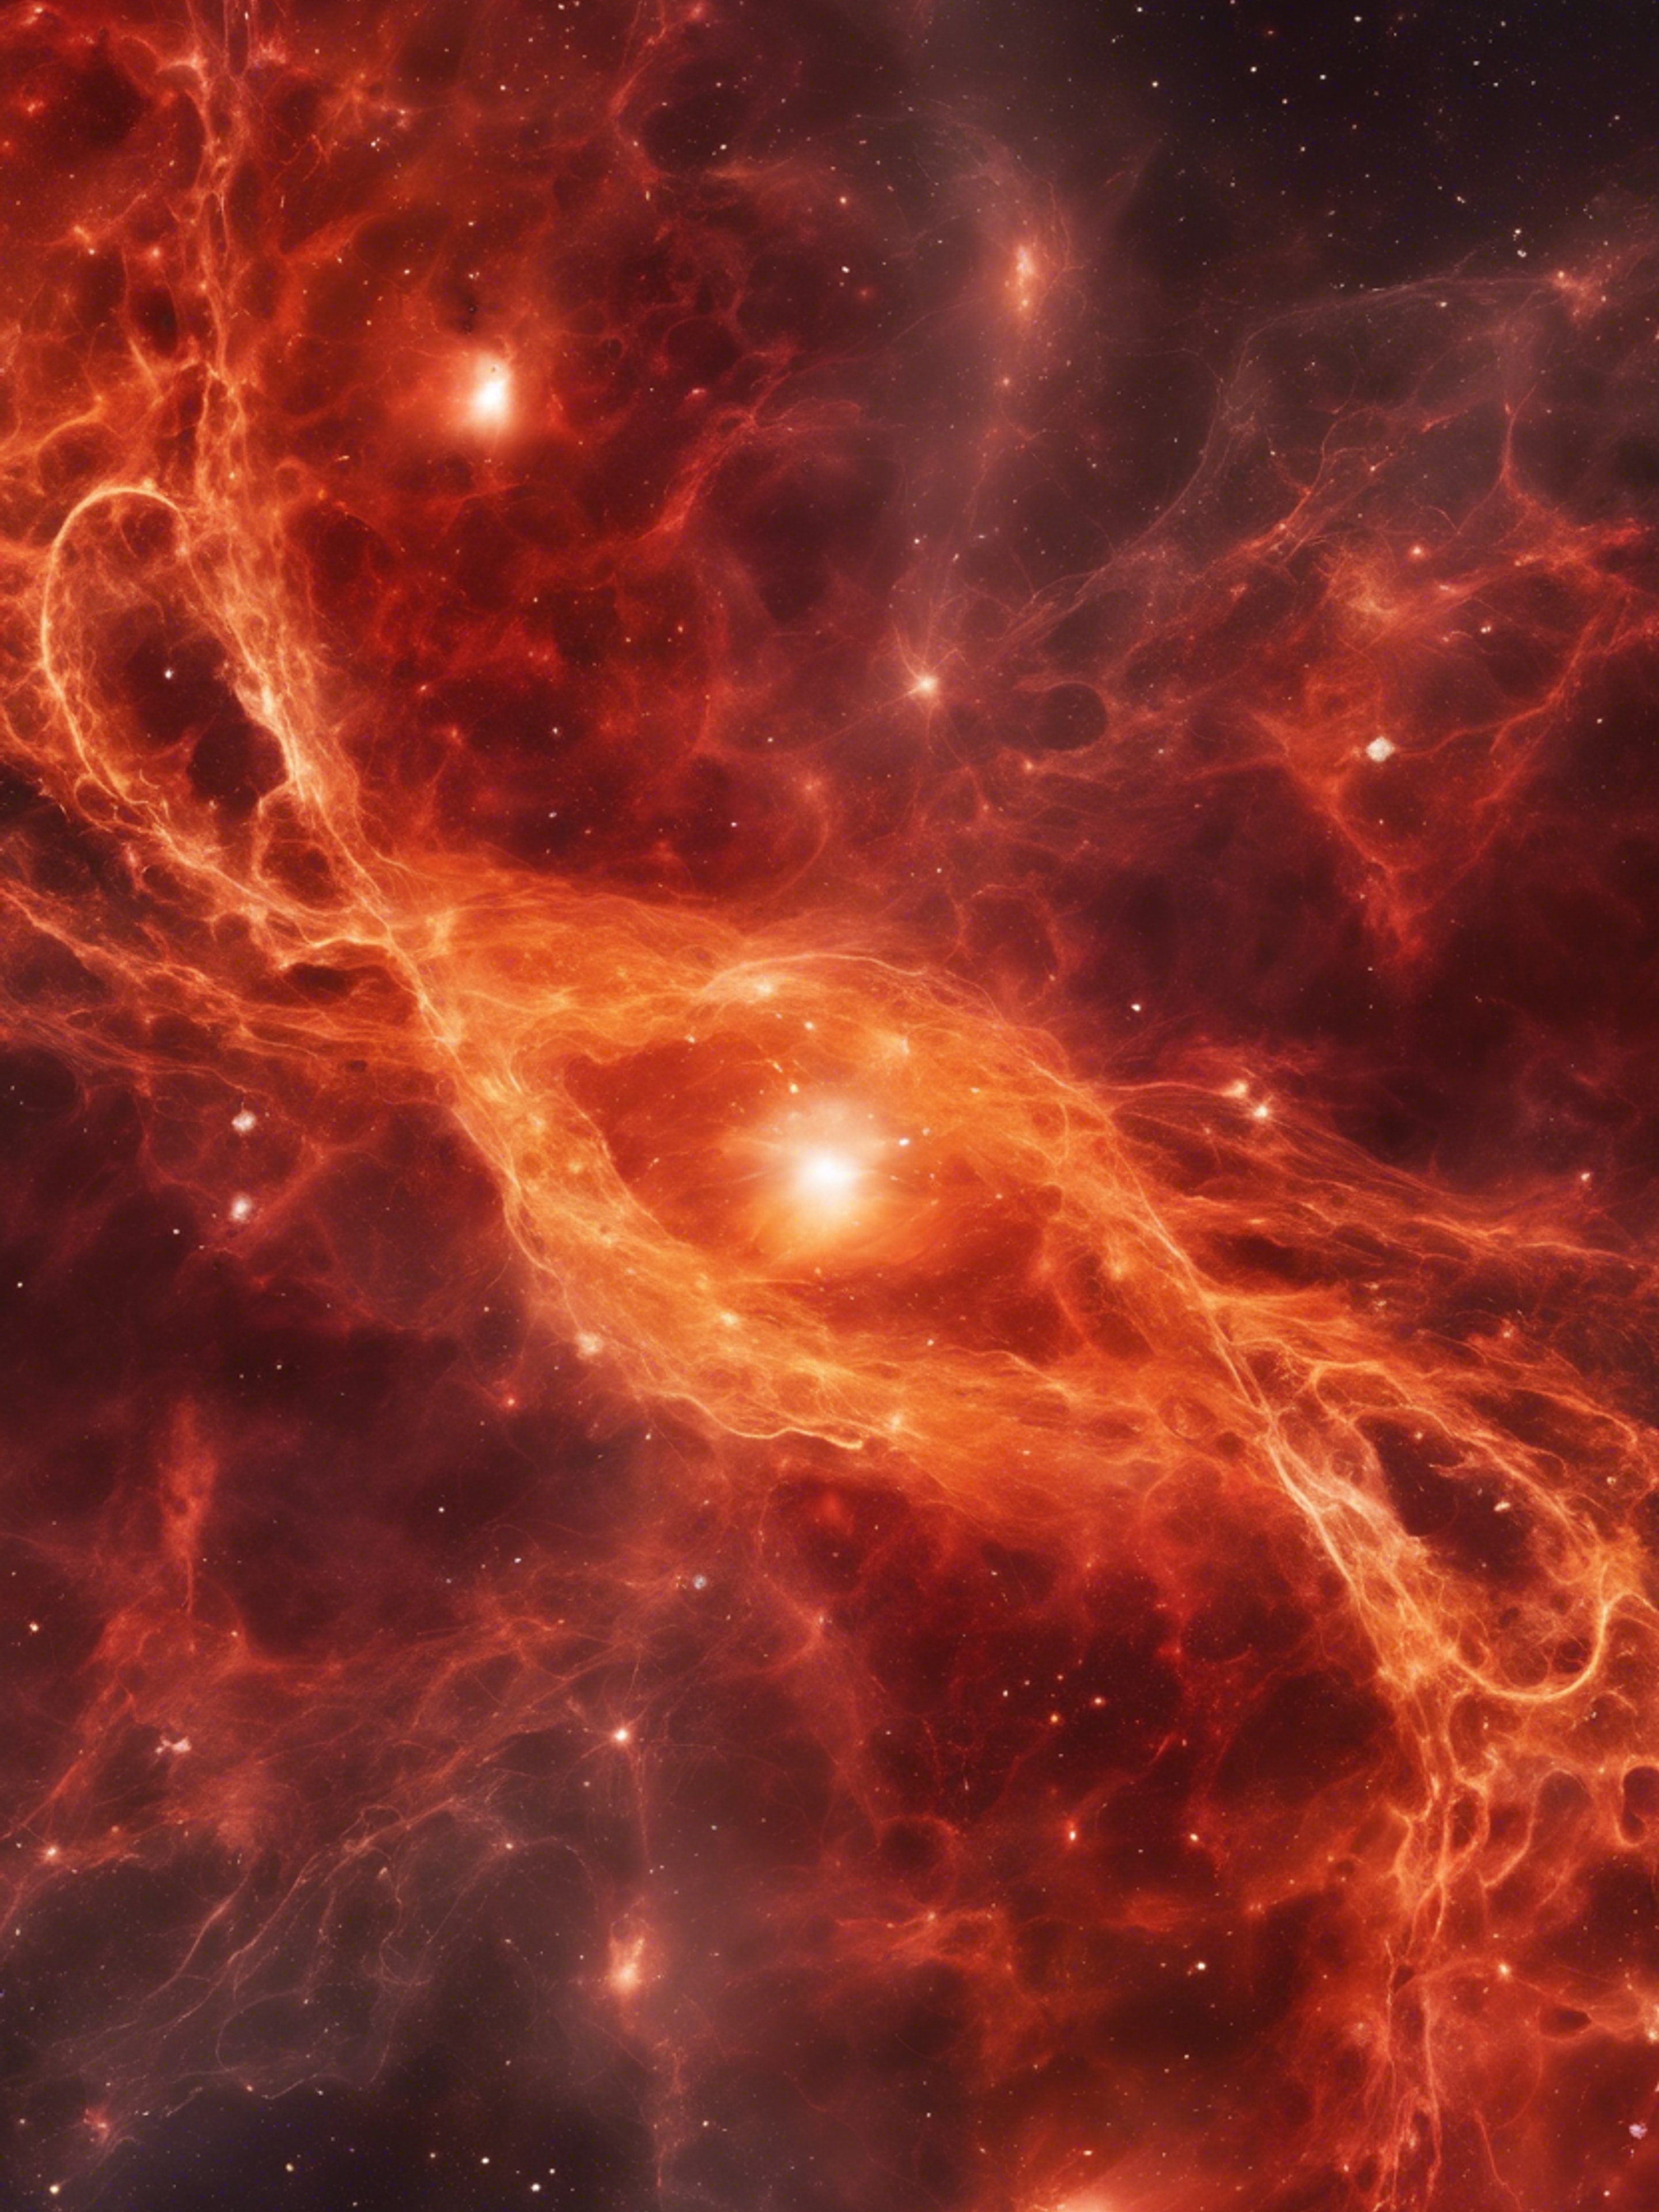 Red and orange nebula moving in chaos to form an alluring abstract pattern, lost in an endless loop. Обои[8b81d5815a2d445c9bb4]